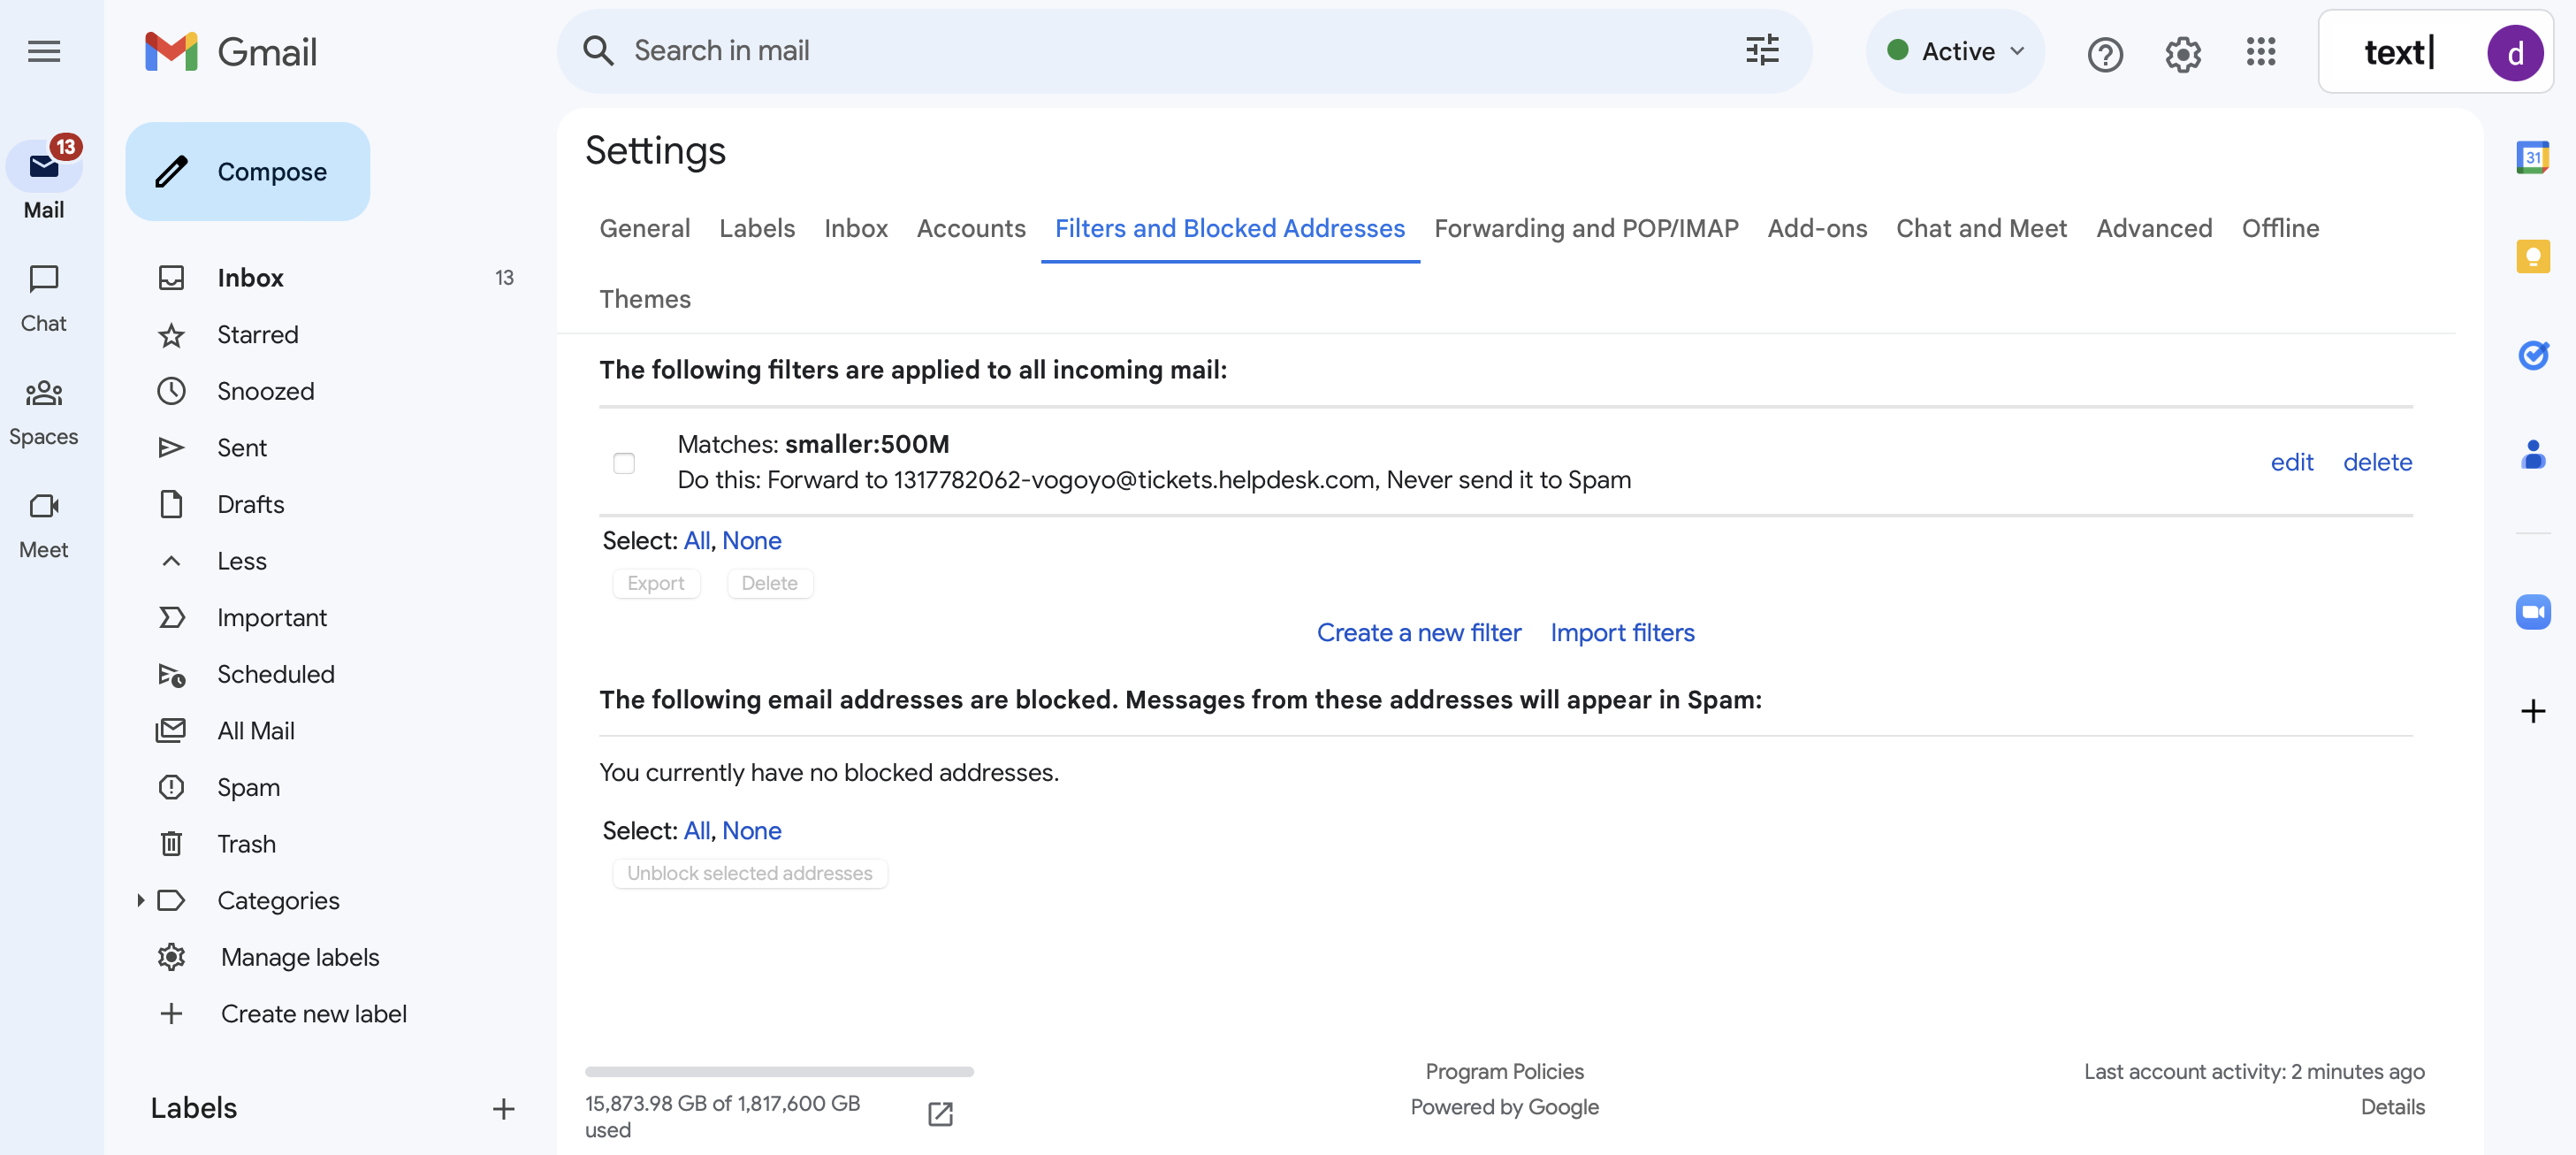 HelpDesk forwarding address added as not Spam in Gmail.